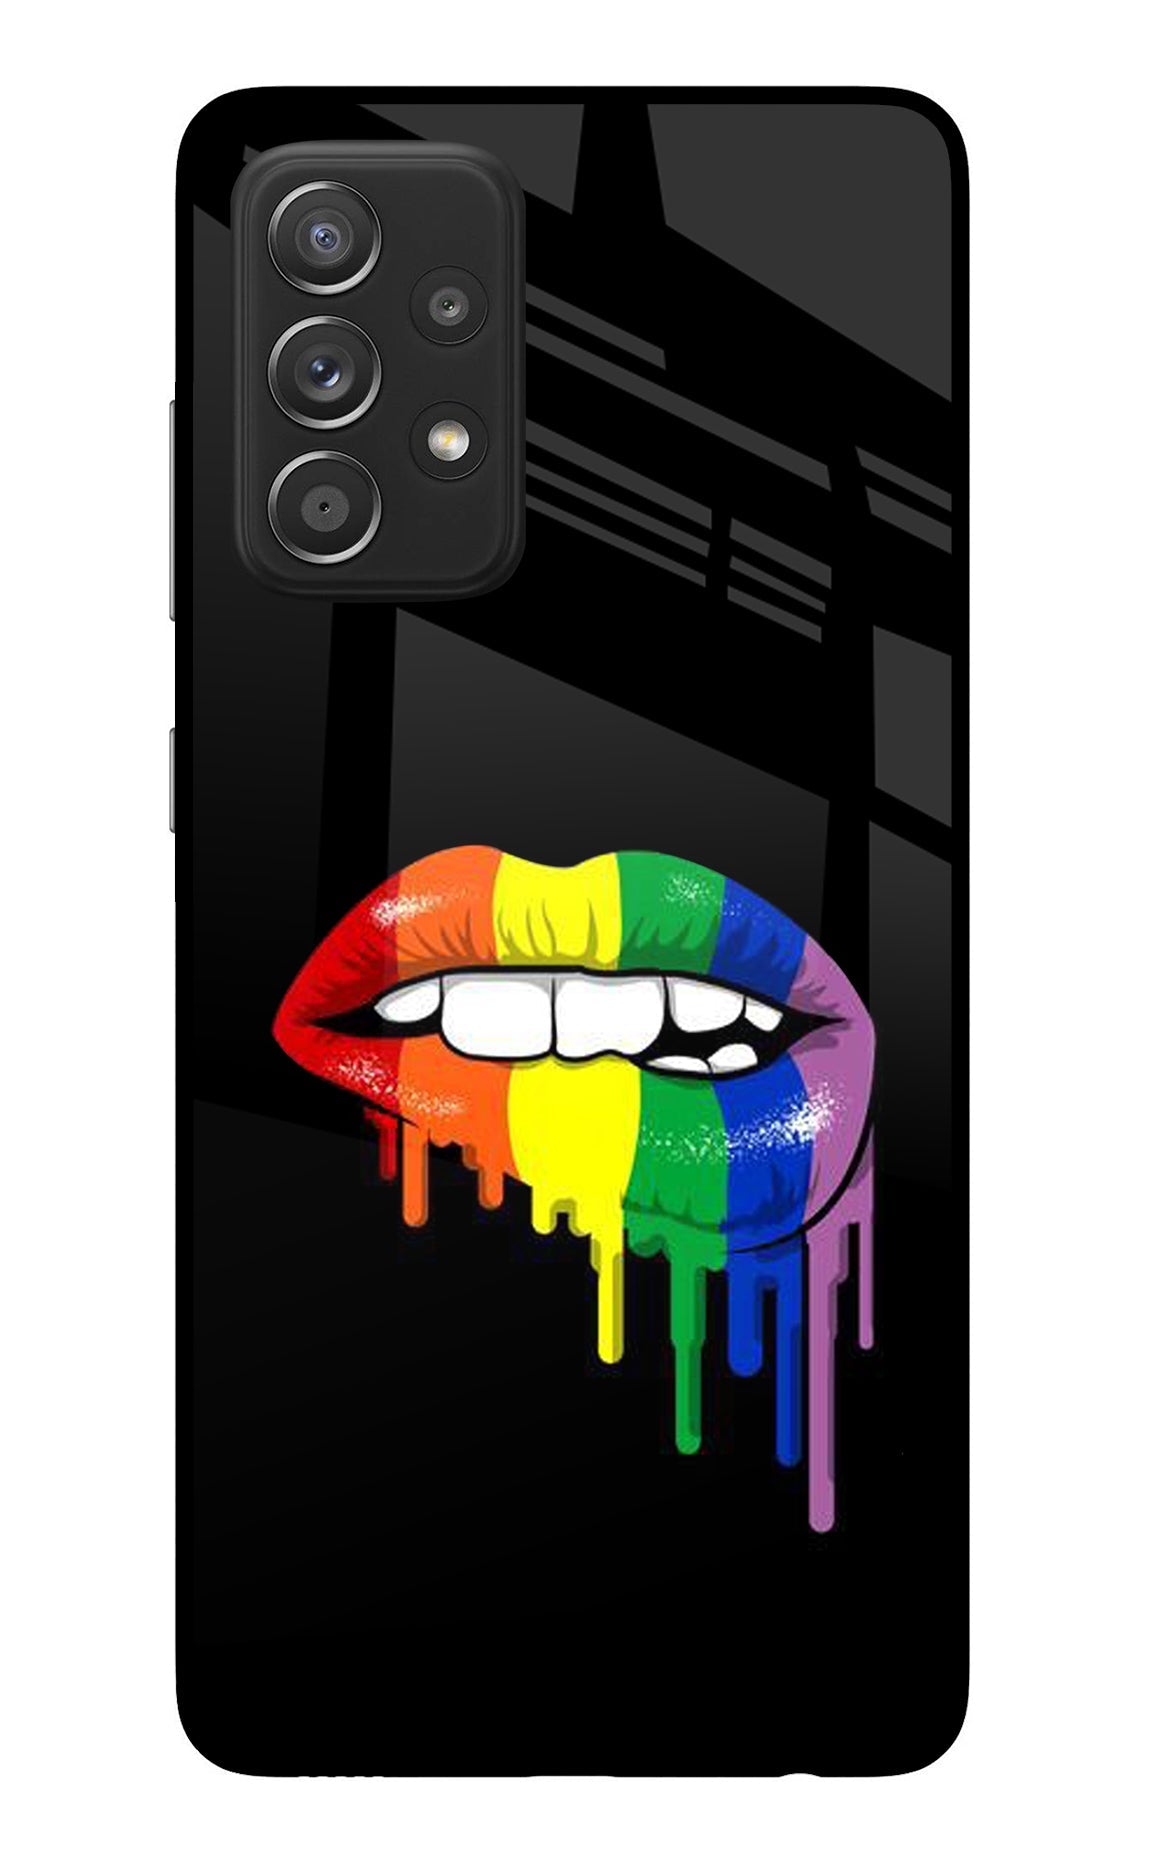 Lips Biting Samsung A52/A52s 5G Back Cover